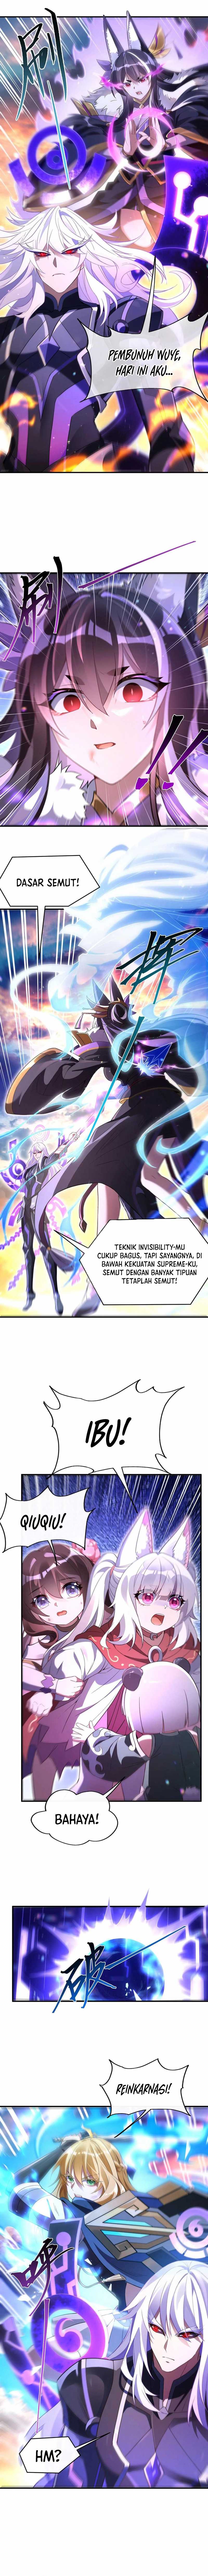 Dilarang COPAS - situs resmi www.mangacanblog.com - Komik my female apprentices are all big shots from the future 244 - chapter 244 245 Indonesia my female apprentices are all big shots from the future 244 - chapter 244 Terbaru 4|Baca Manga Komik Indonesia|Mangacan